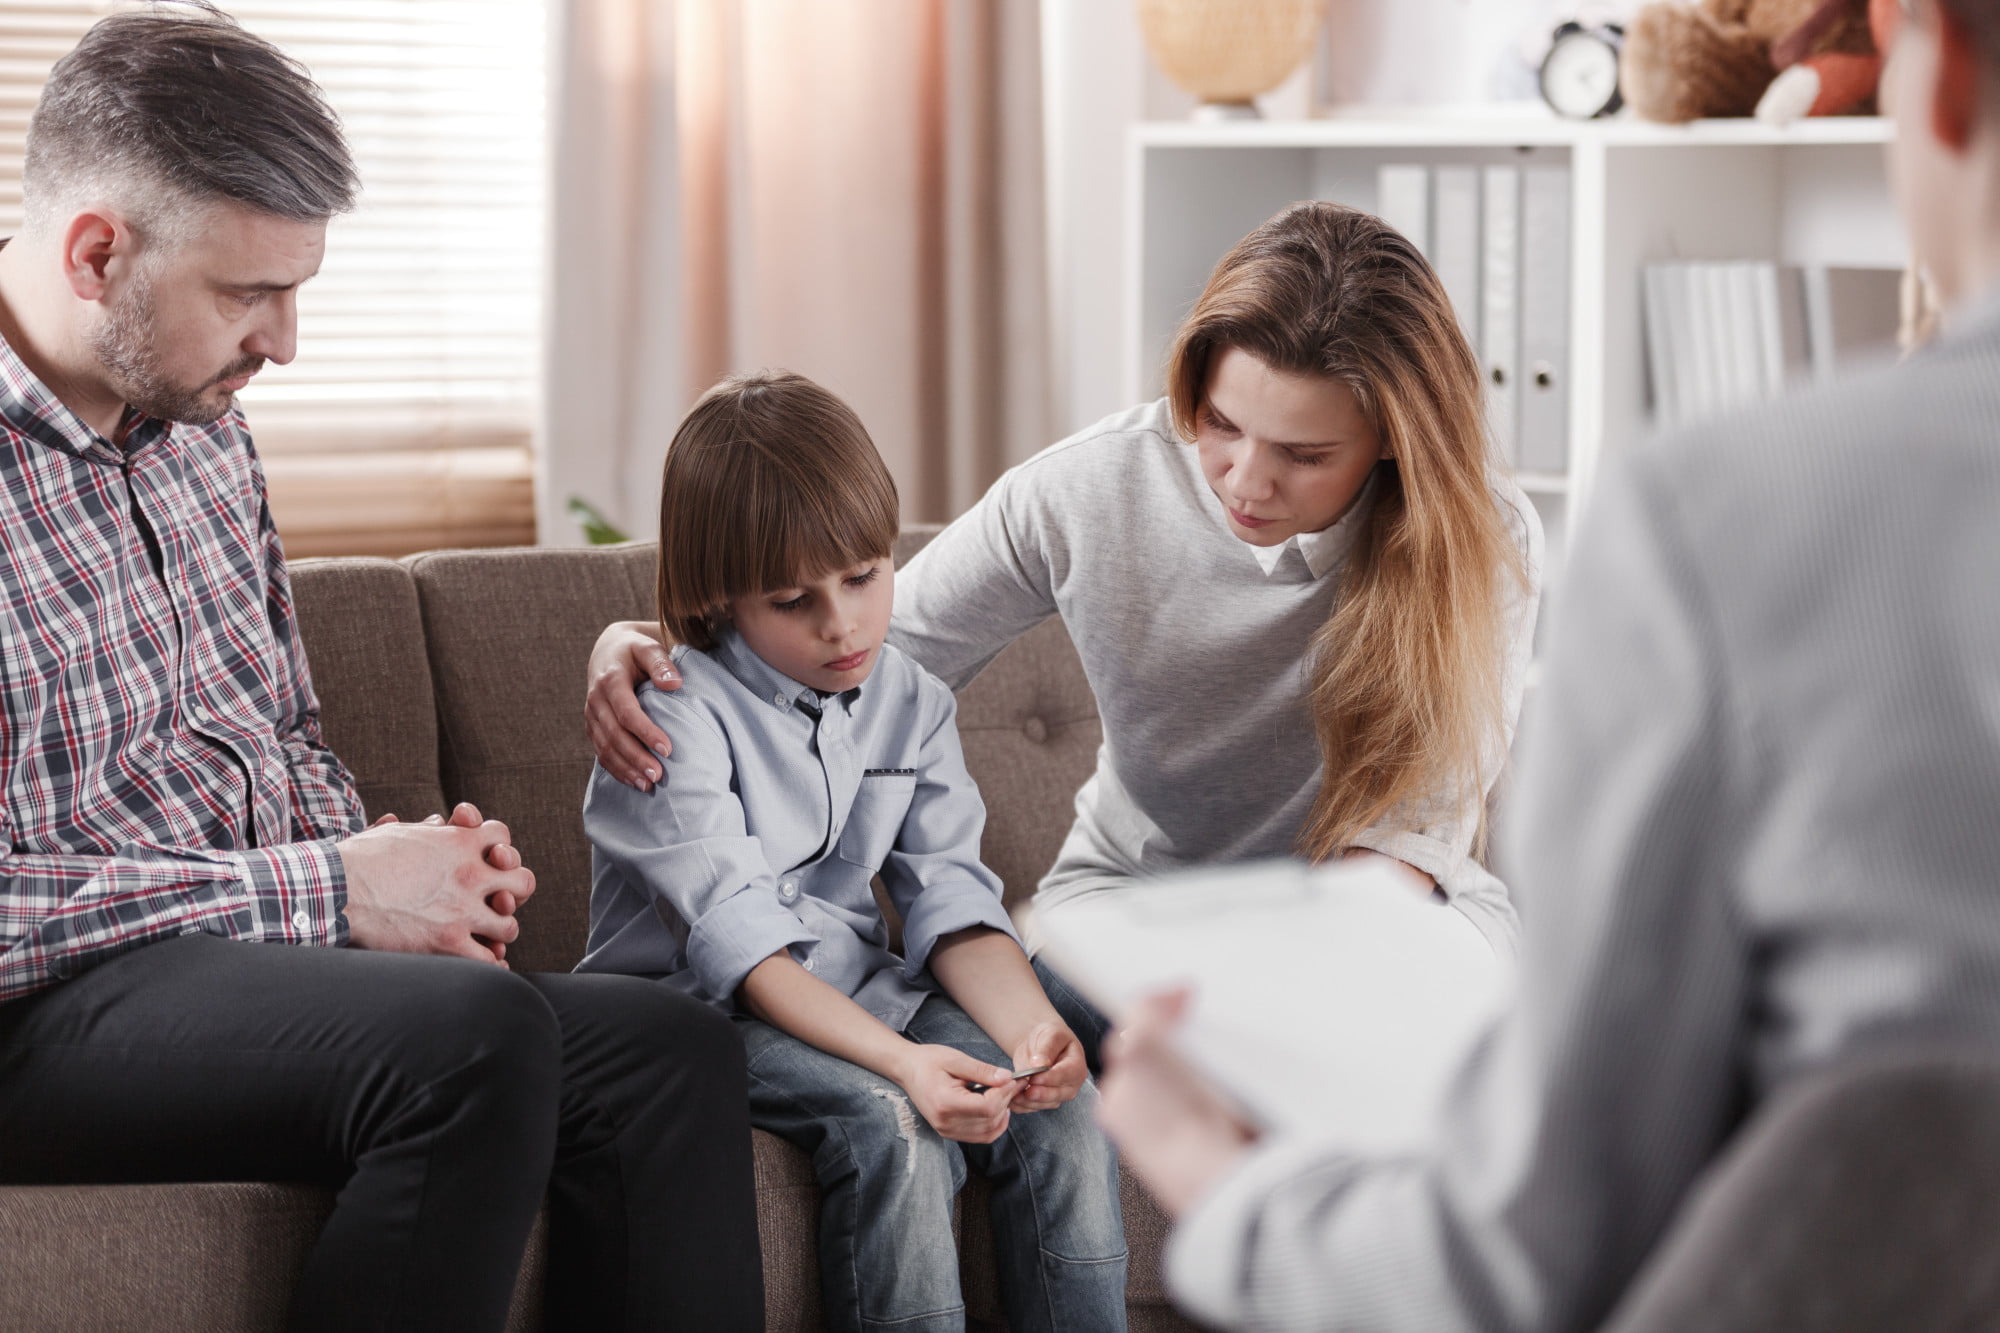 Family Therapy near me: Do you want to know how to choose a family therapist for you? Read on to learn how to make the right choice.